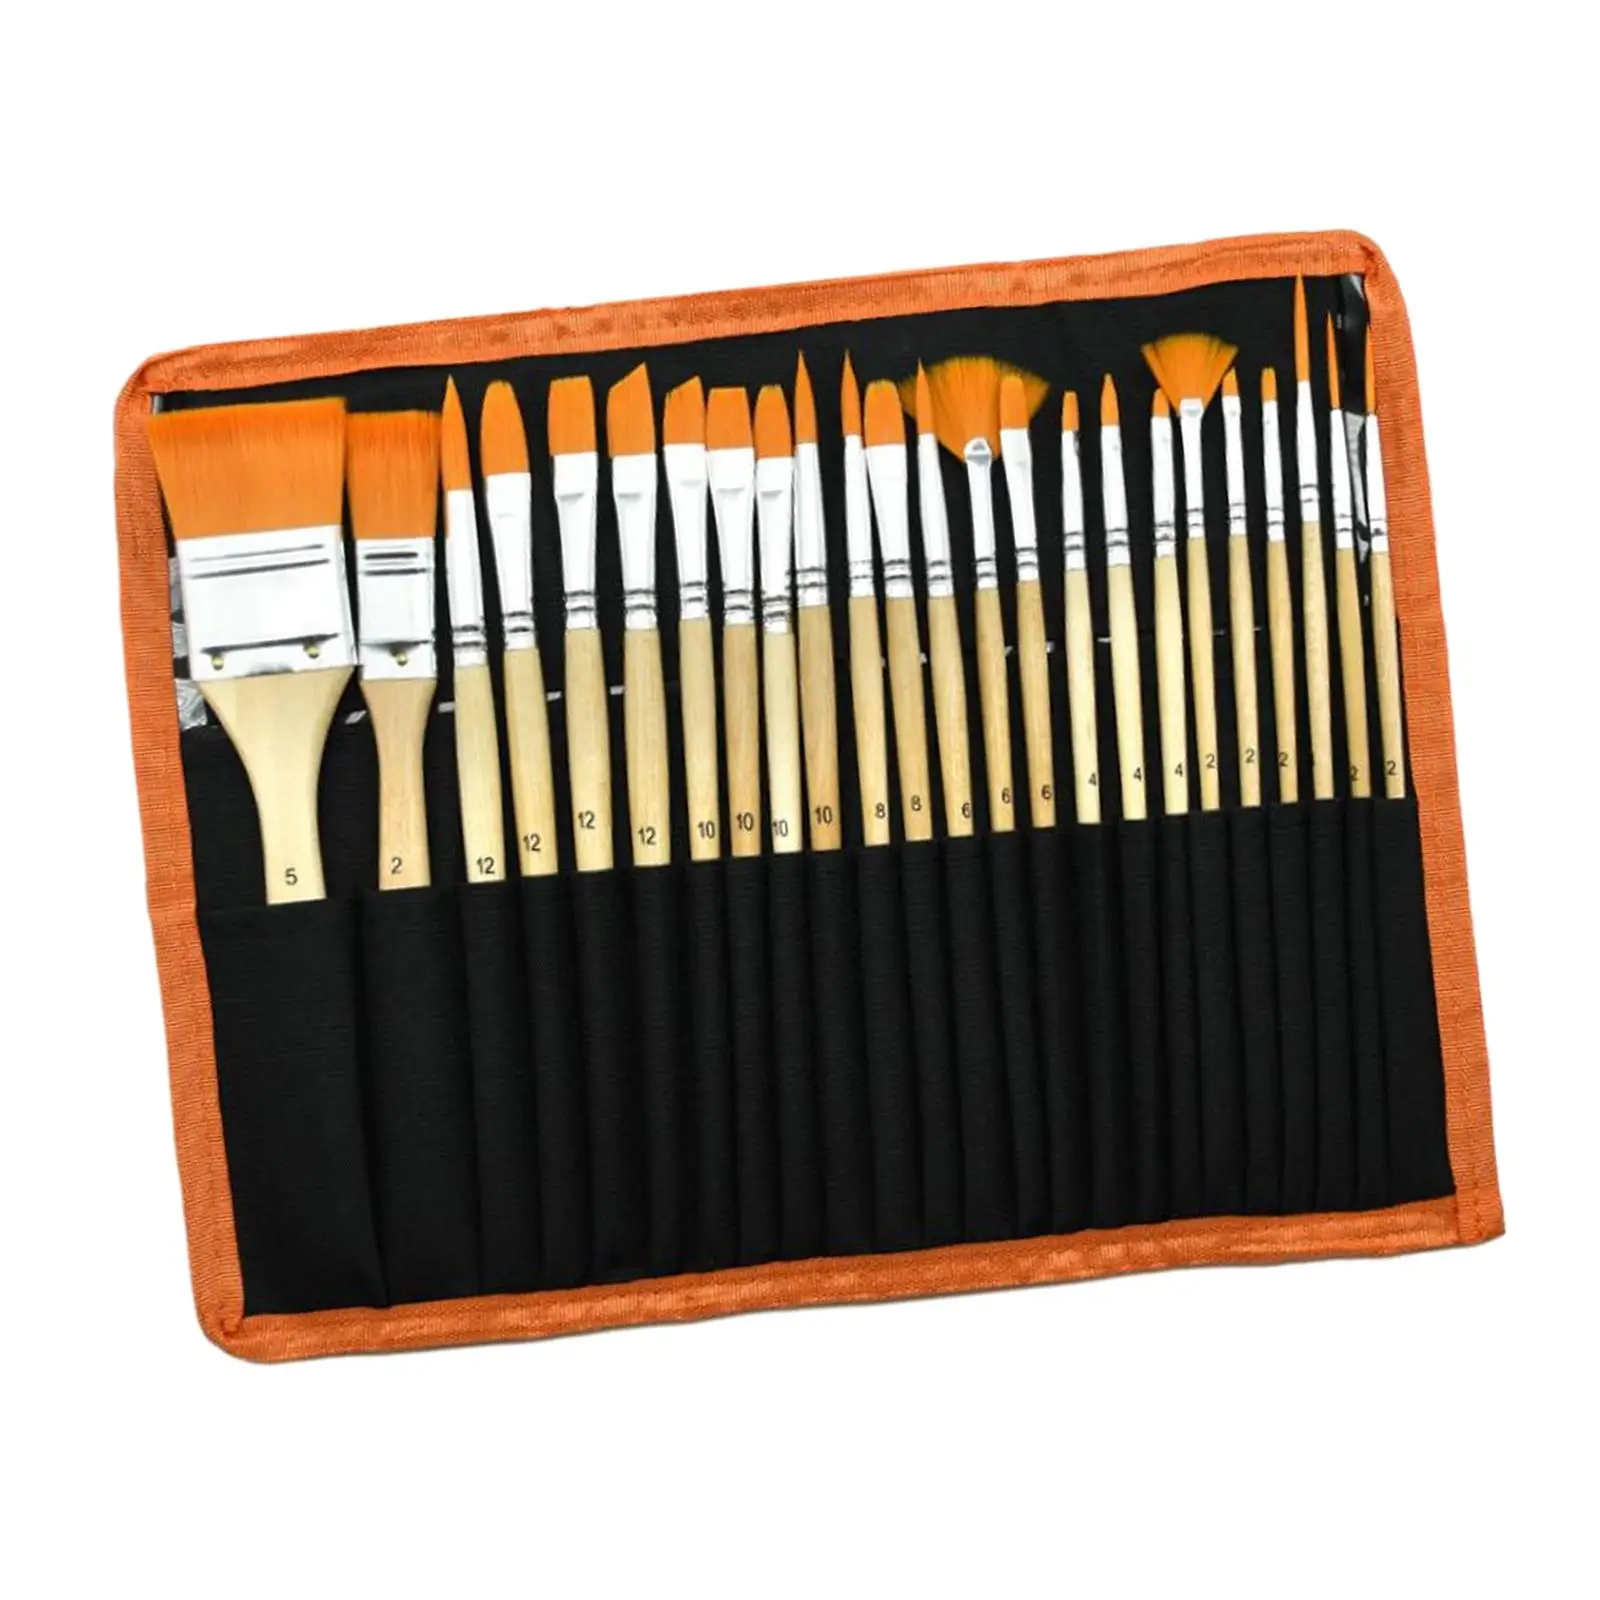 24Pcs Art Paint Brushes for Acrylic Painting Face Paint Brushes for Oil Watercolor Arts Crafts Drawing Gouache Pumpkin Painting